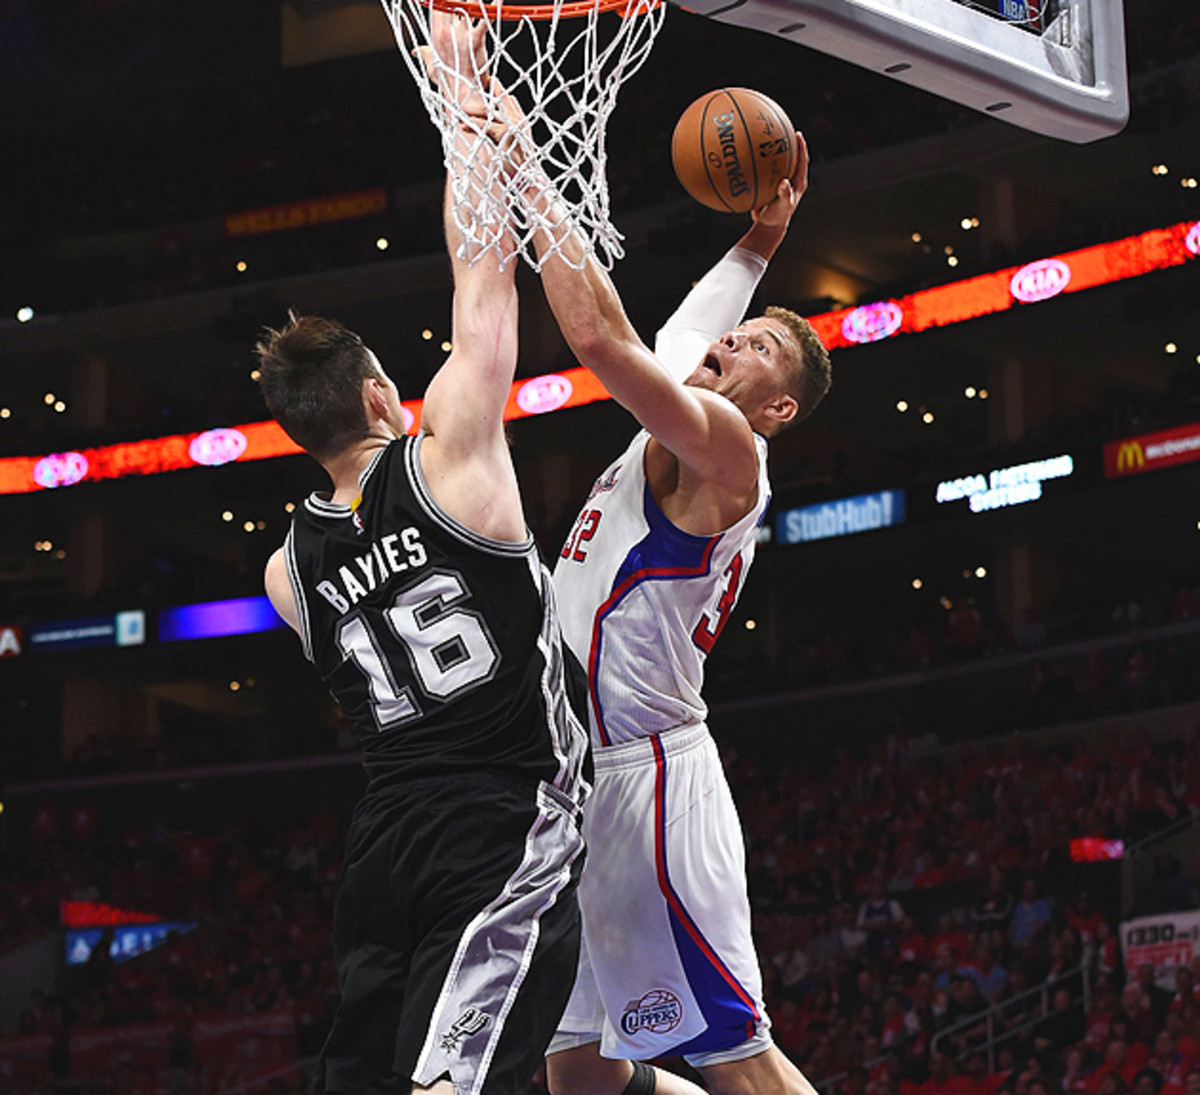 blake-griffin-dunk-aron-baynes-clippers-spurs-game-1.jpg